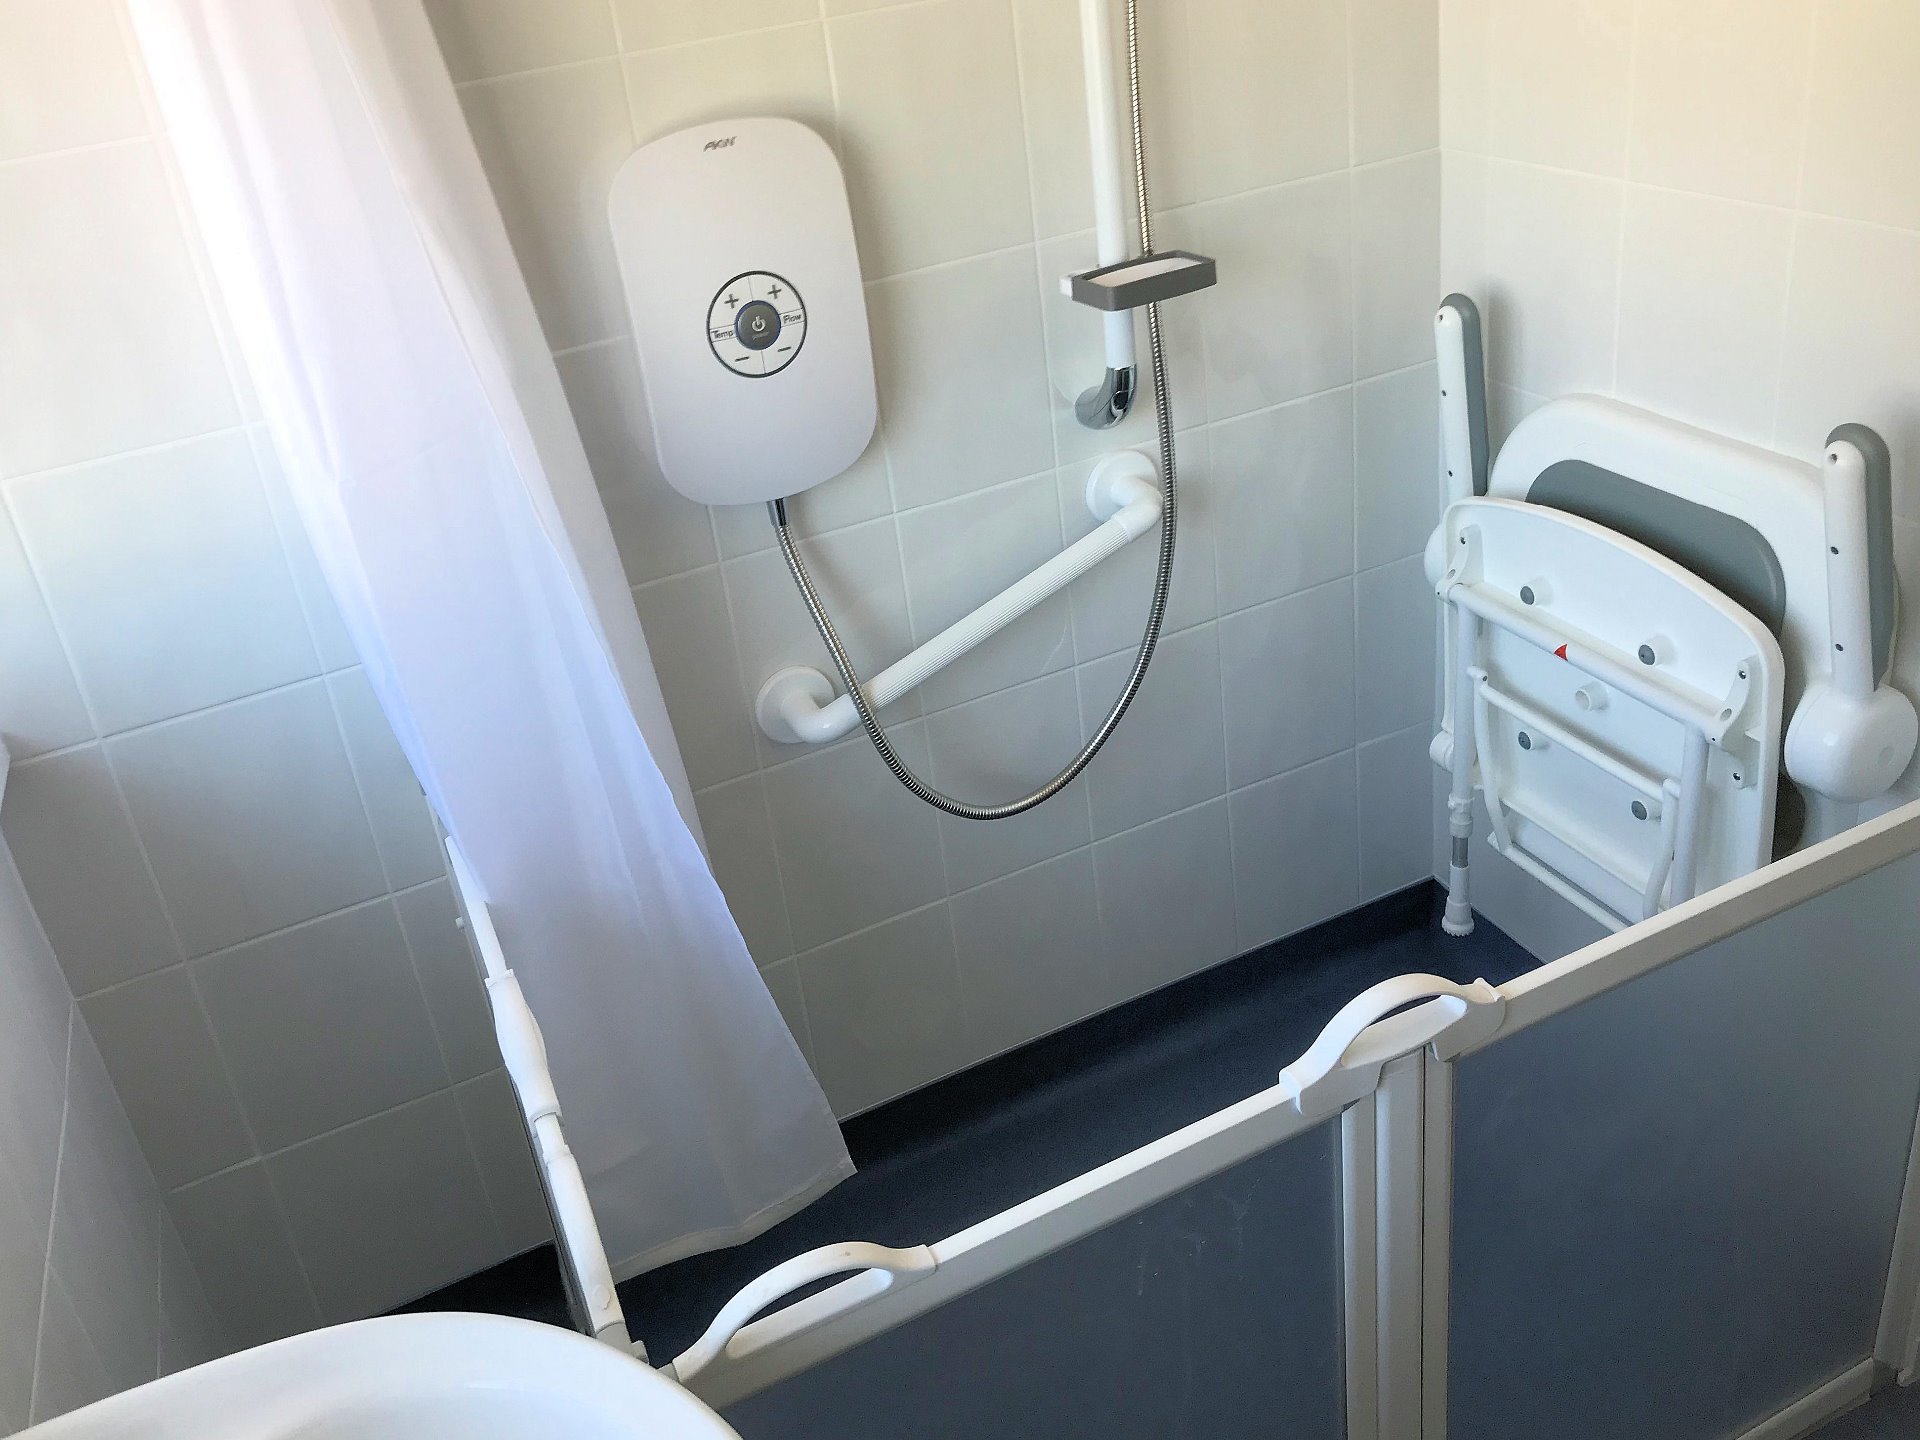 Adaption suit installed including easy use shower support handles gate access and fold down seat and shower curtain